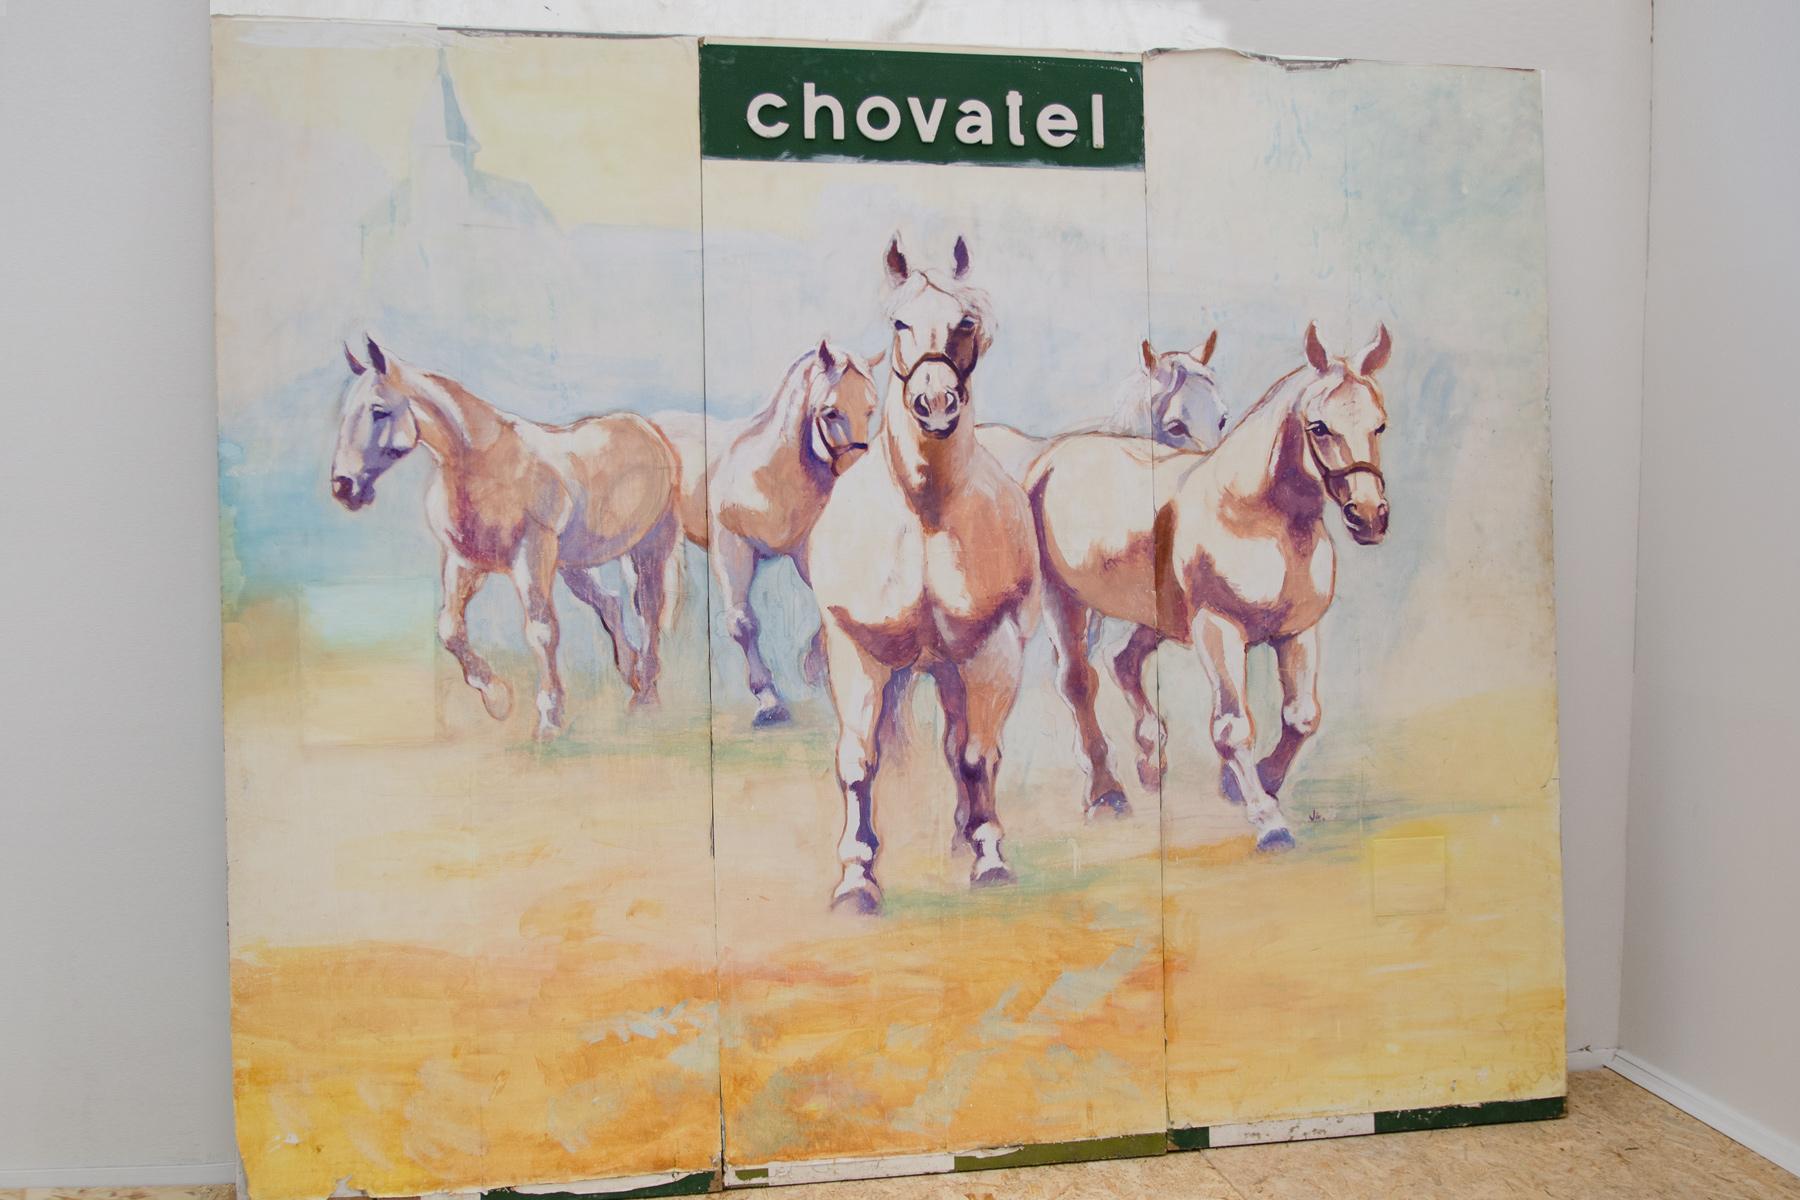 A huge modular painting with a horse motif, made in the 70s in the former Czechoslovakia. This painting is composed of 3 separate sololith panels that are joined together. It is an acrylic technique. The painting is in good condition, it has minor